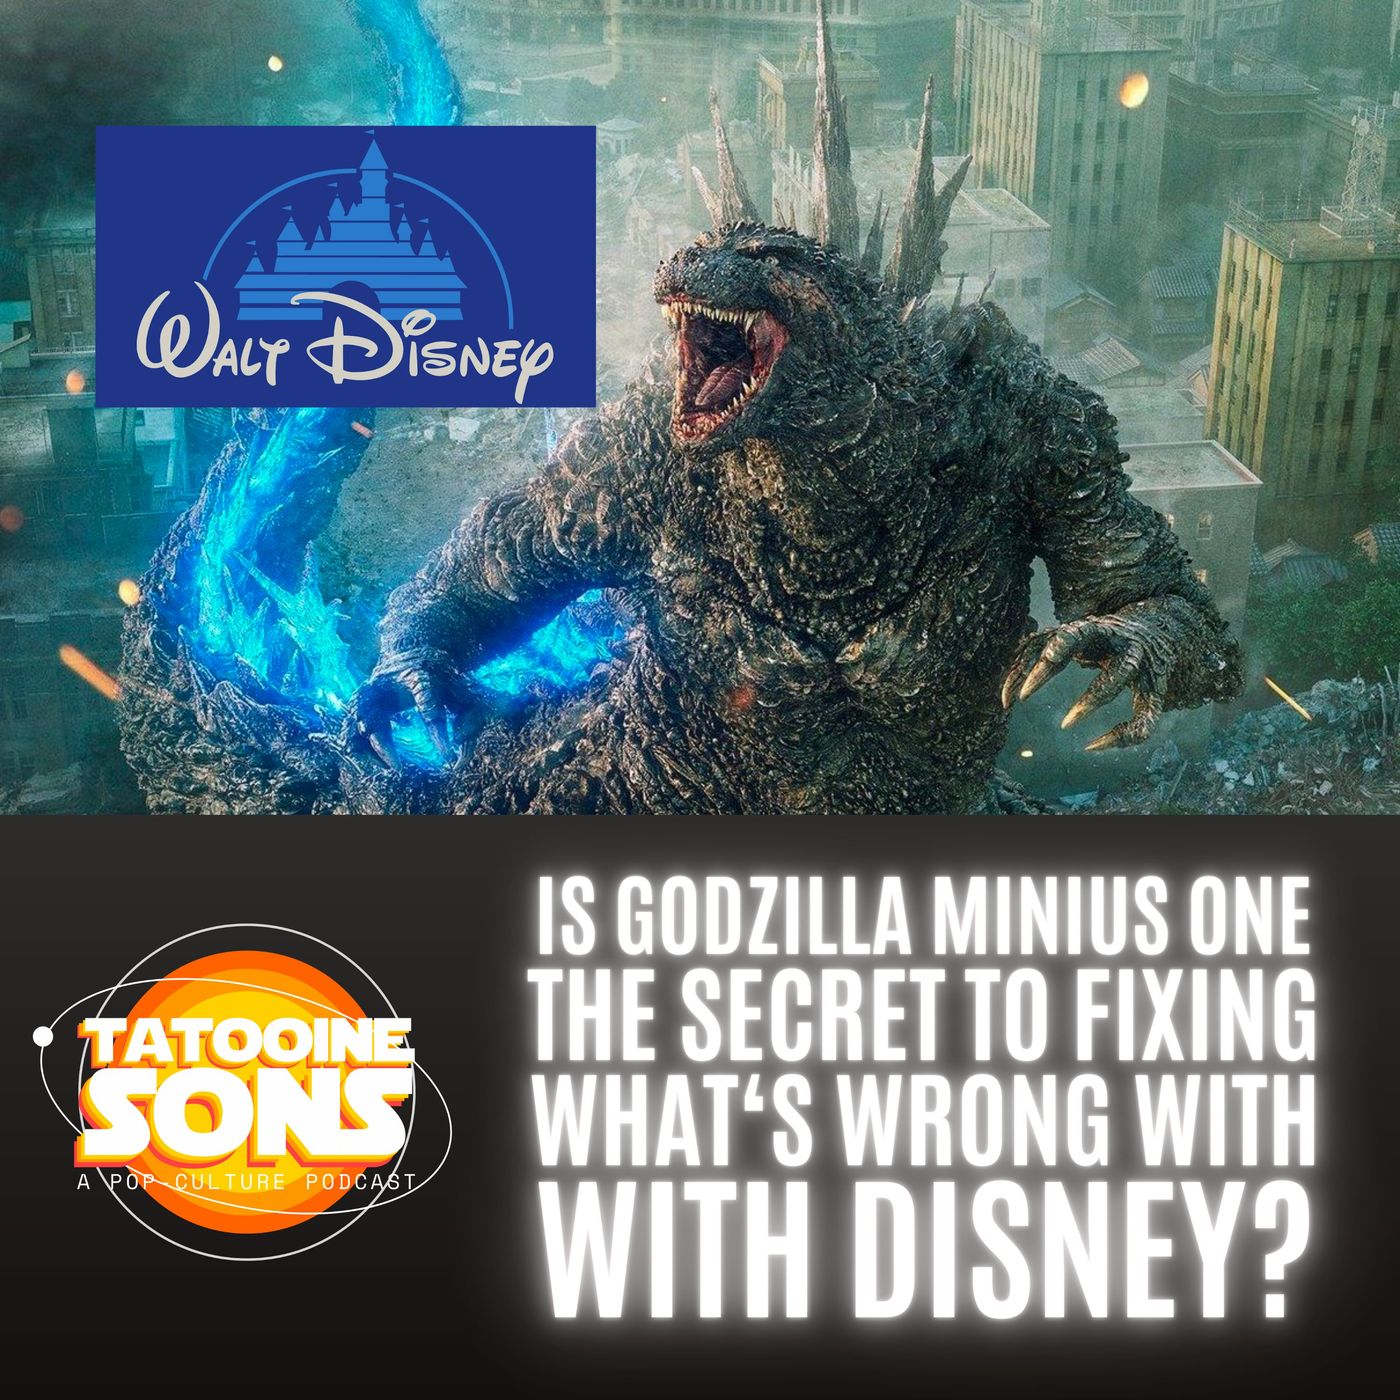 Is Godzilla Minus One theSecret to Fixing What’s Wrong With Disney?